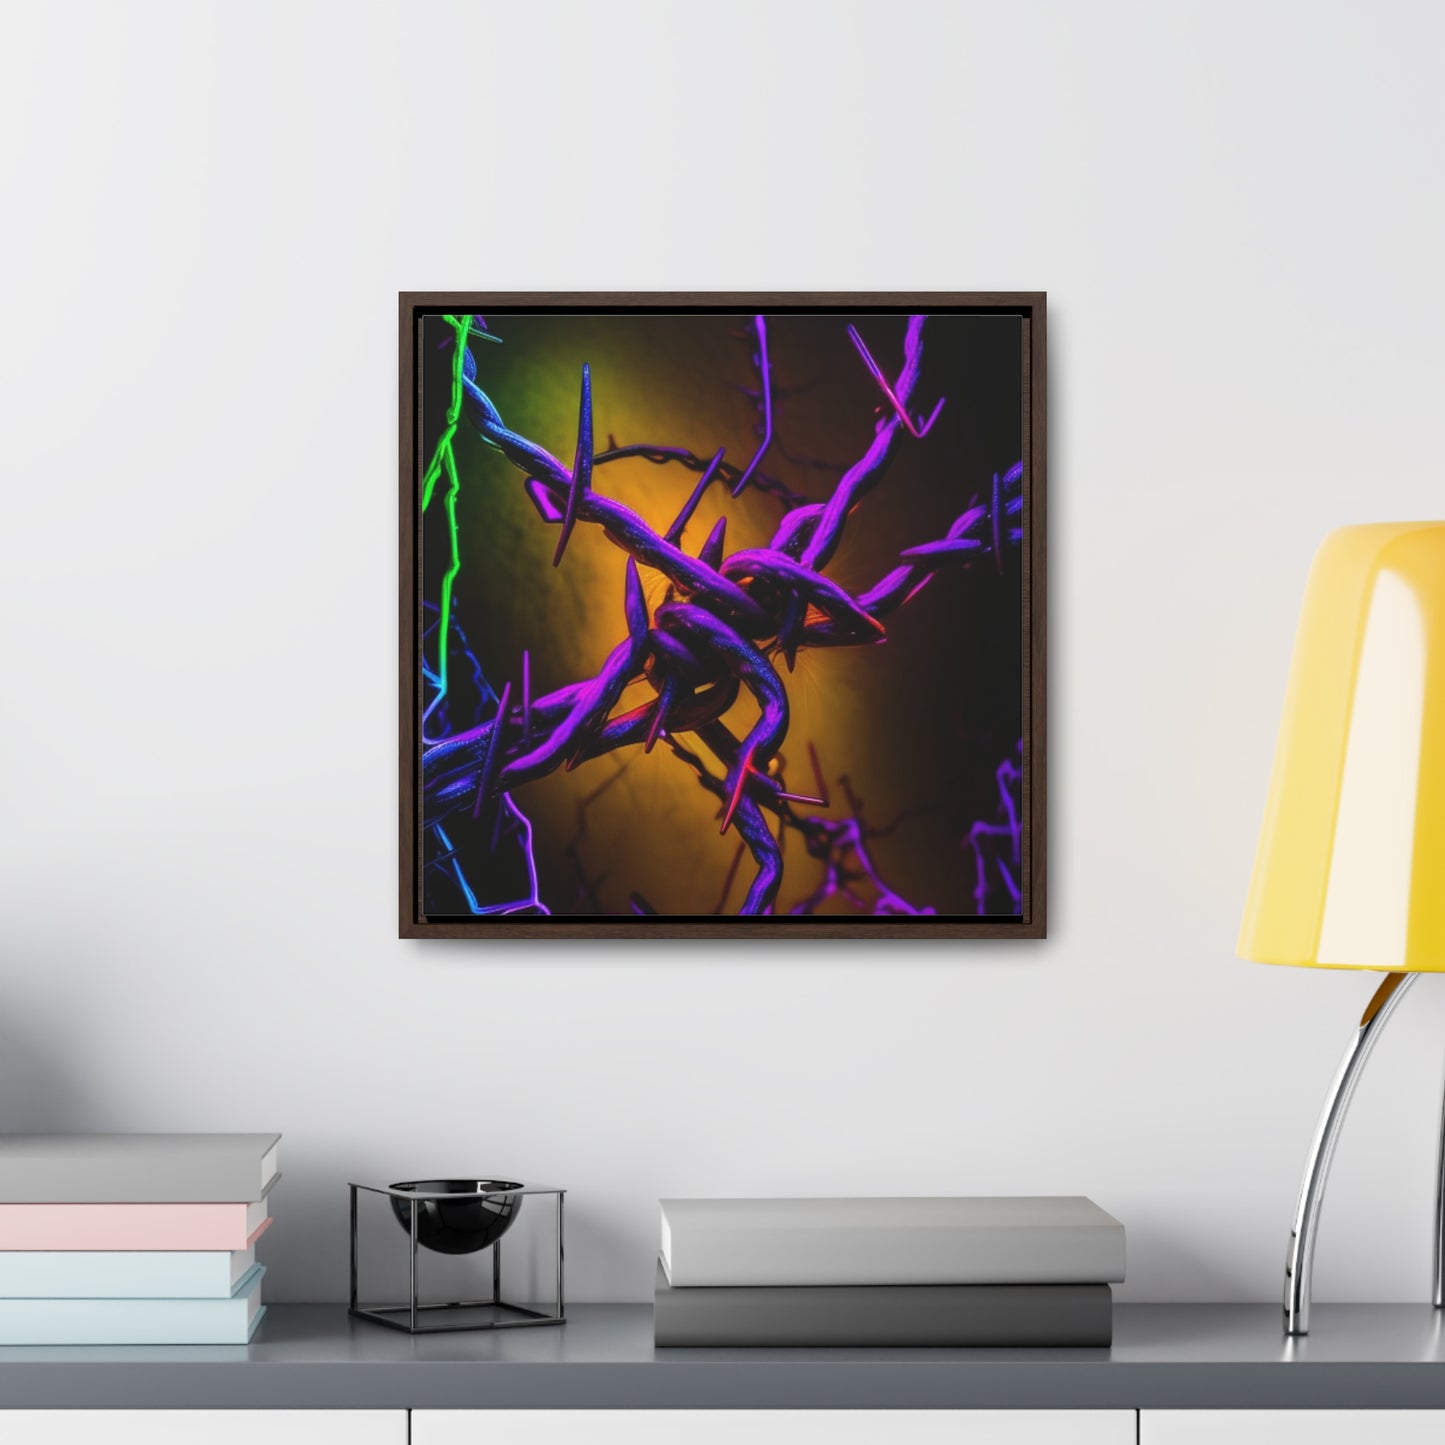 Gallery Canvas Wraps, Square Frame Macro Neon Barb 1